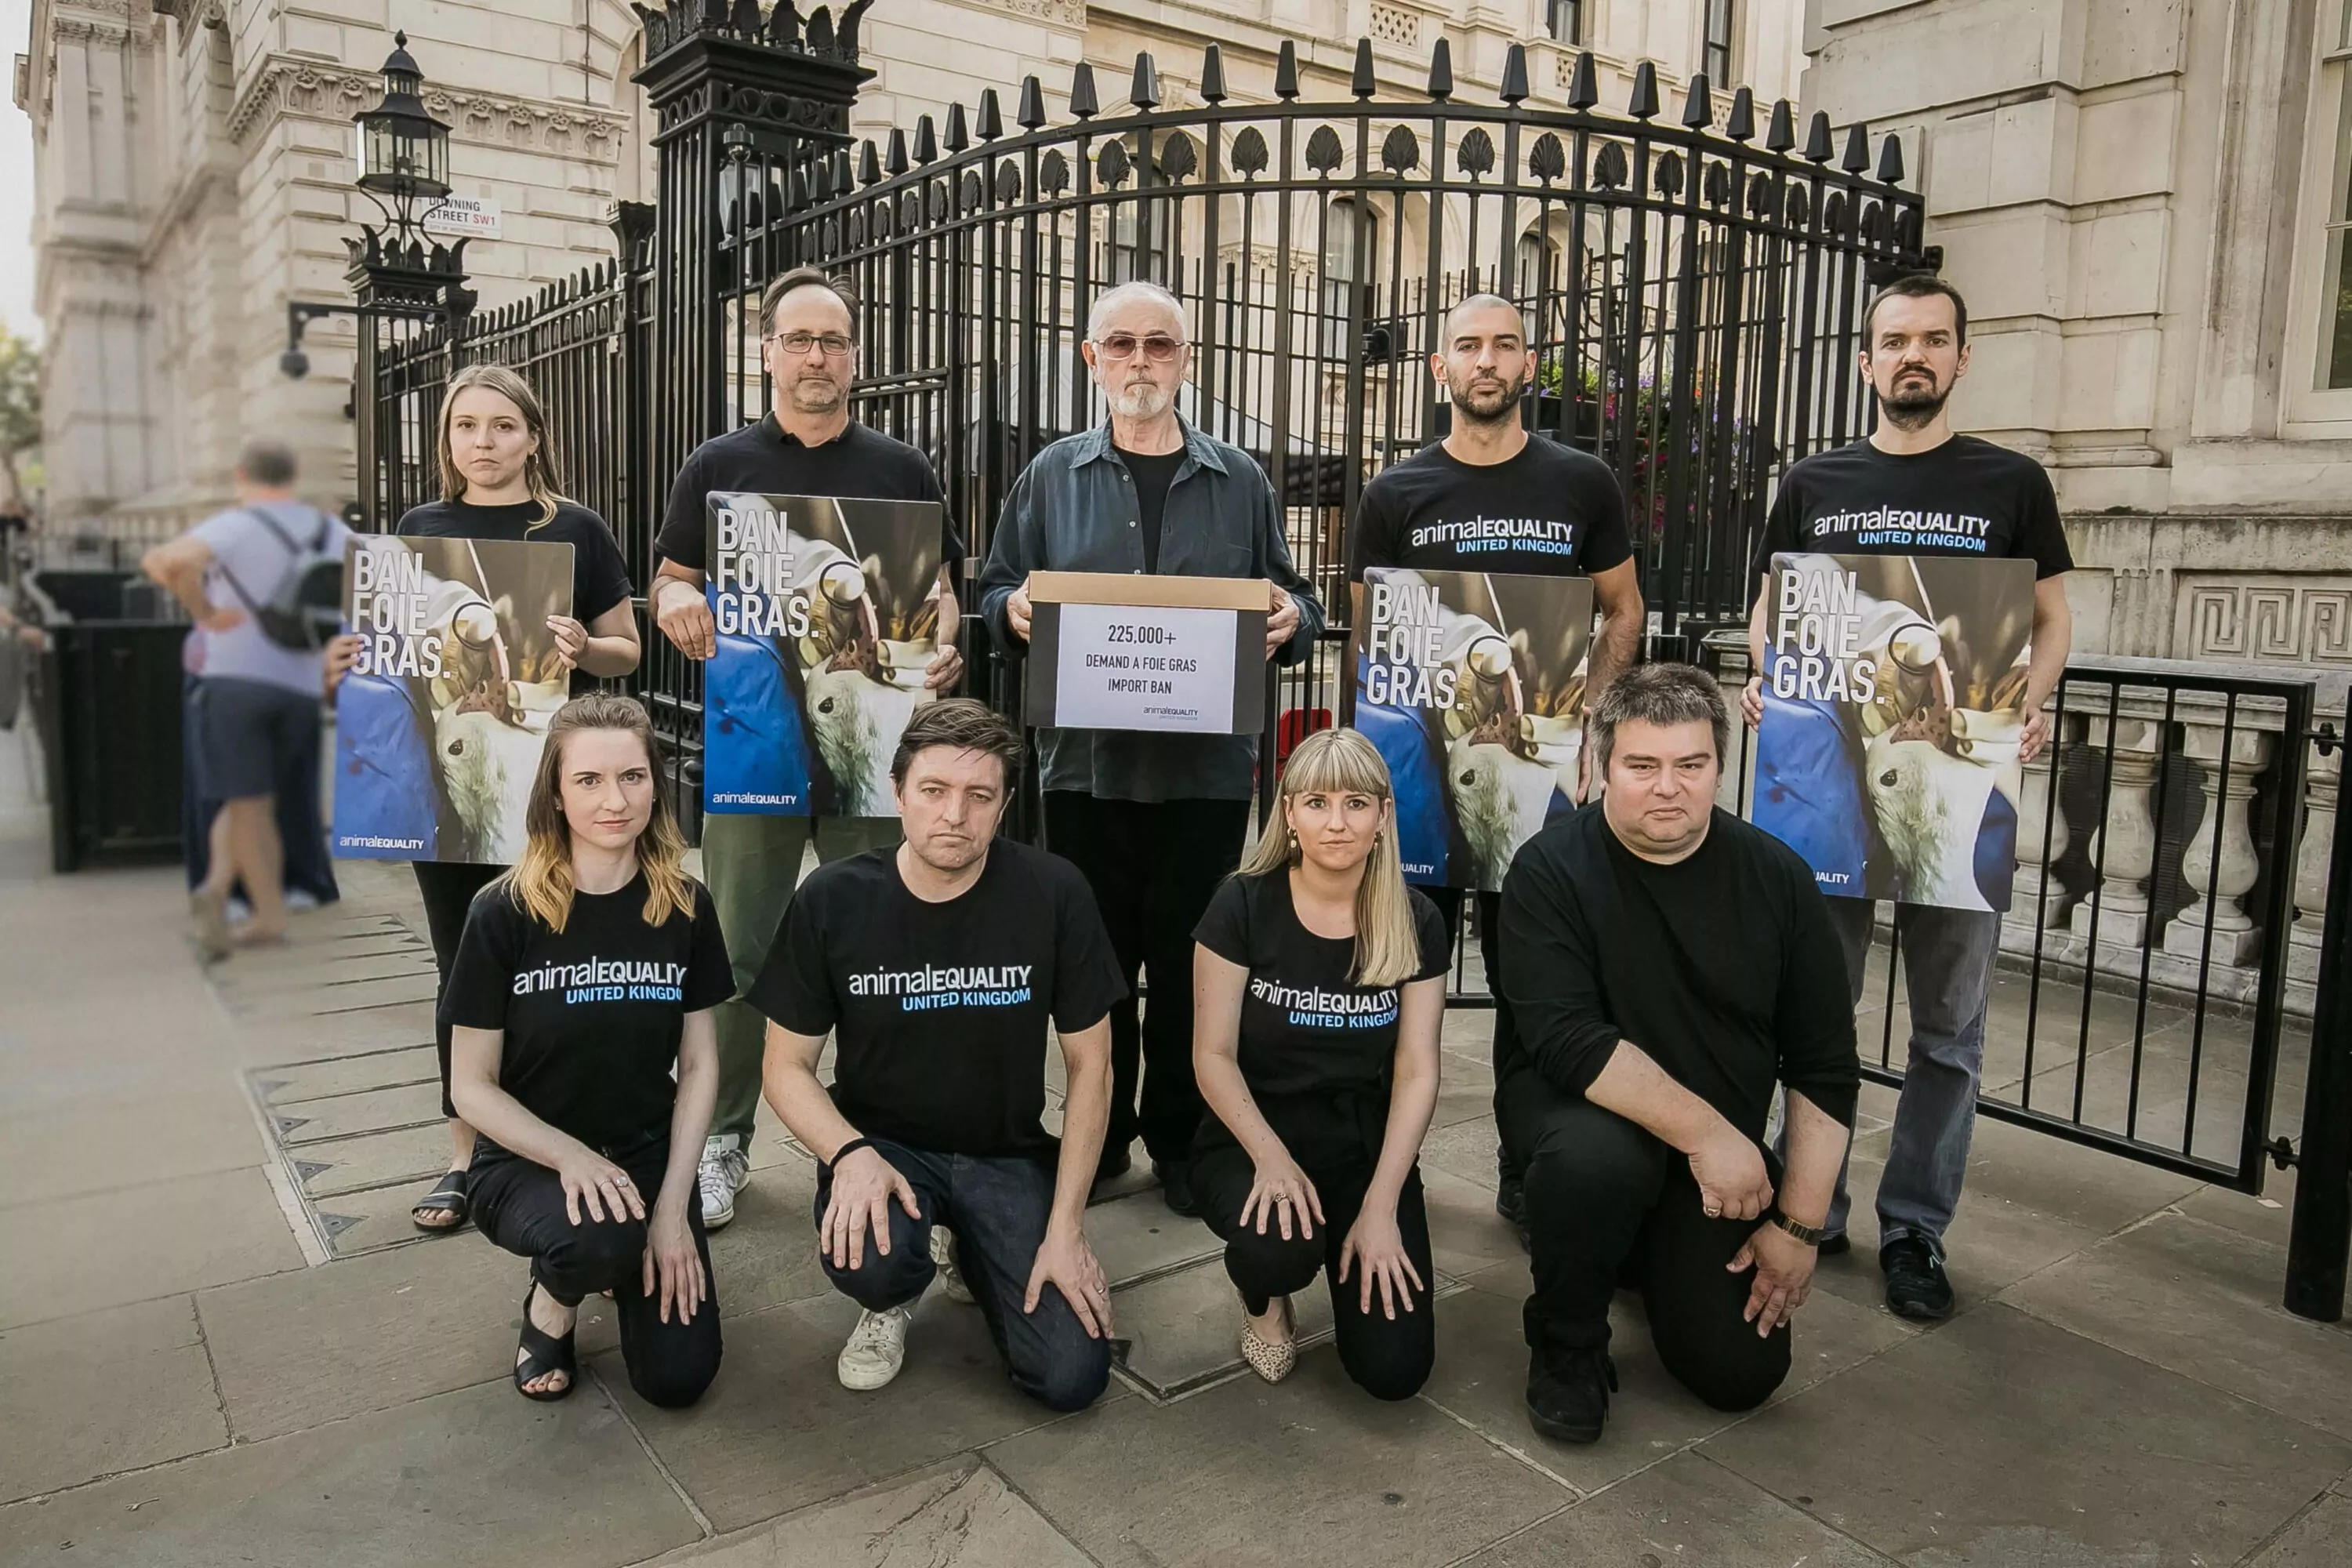 Peter Egan with Animal Equality's supporters at Downing Street delivering 225,000 signatures to ban foie gras made by force-feeding 